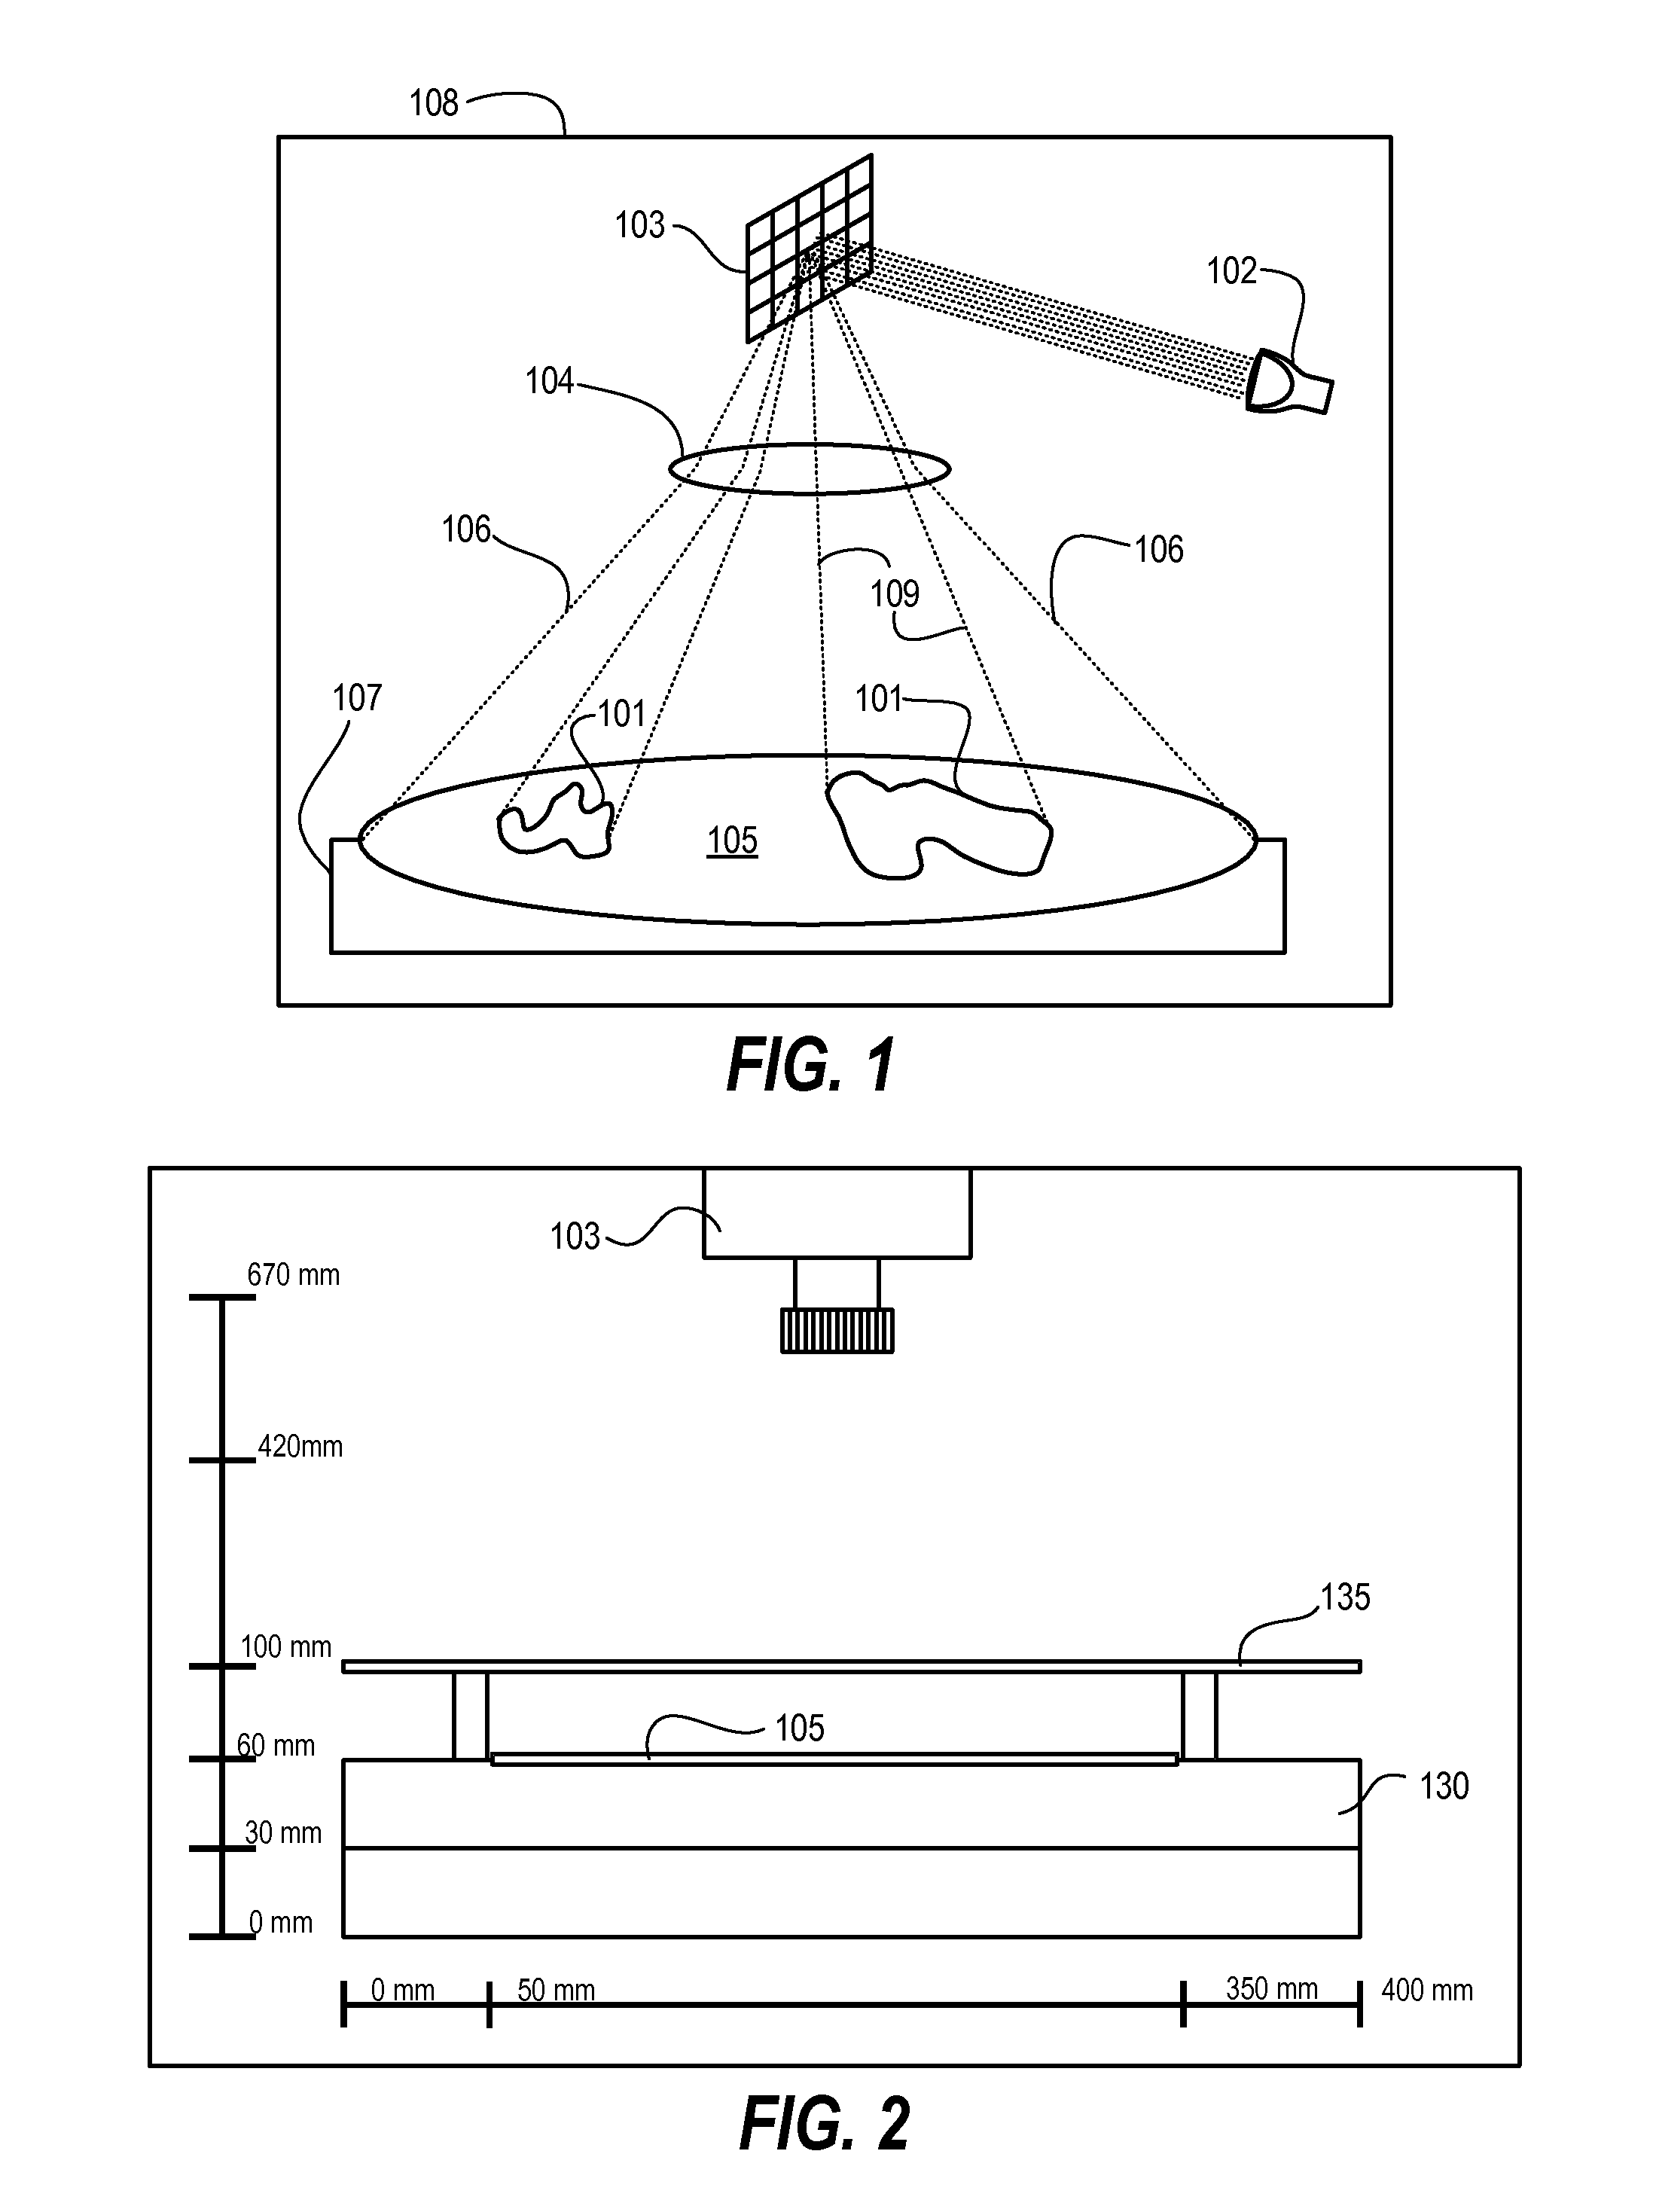 System and Method for Shifting Critical Dimensions of Patterned Films